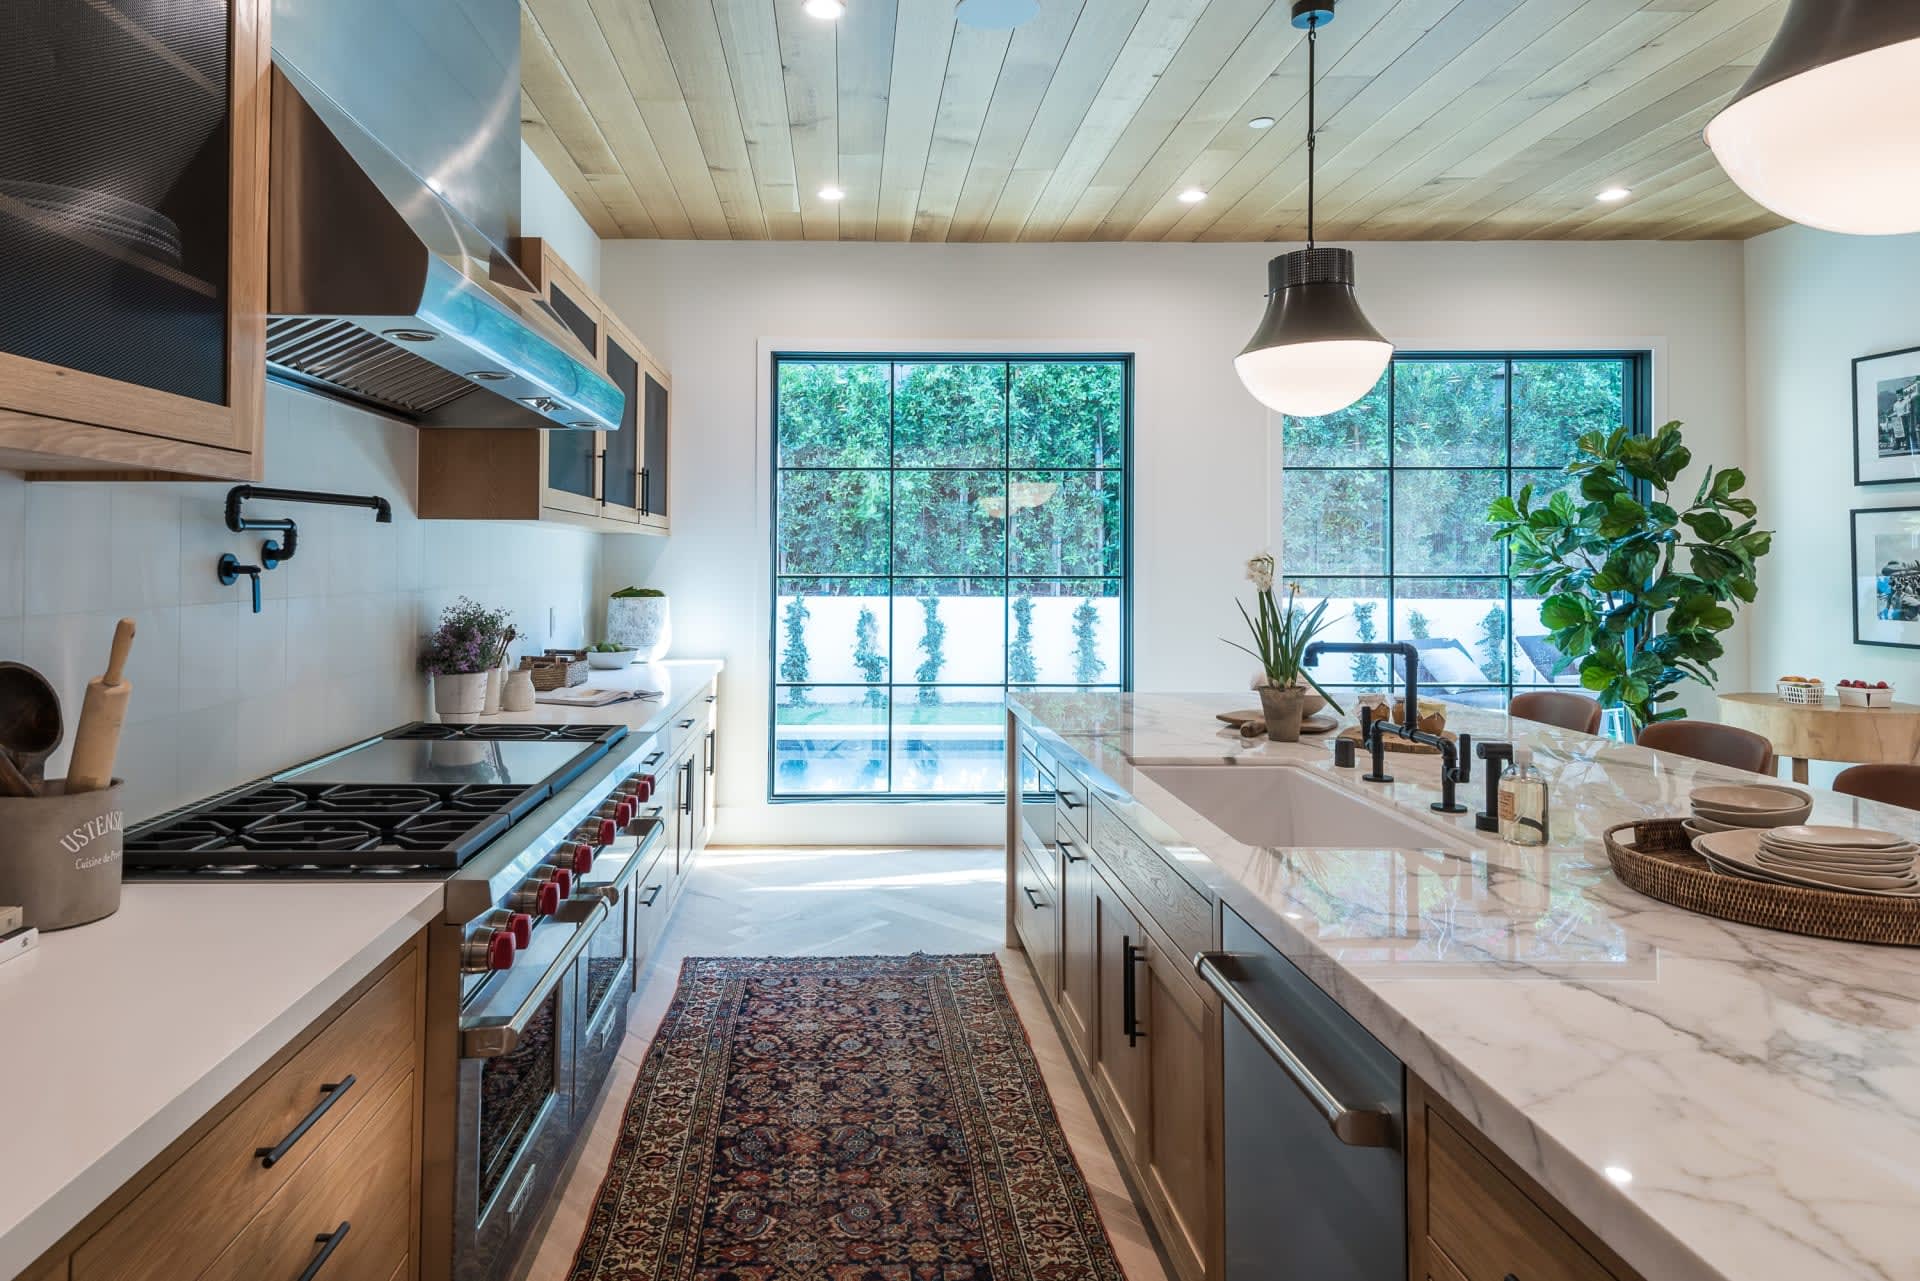 A large kitchen with stainless steel appliances, wooden cabinets, a large island with a sink and faucet, and pendant lights.